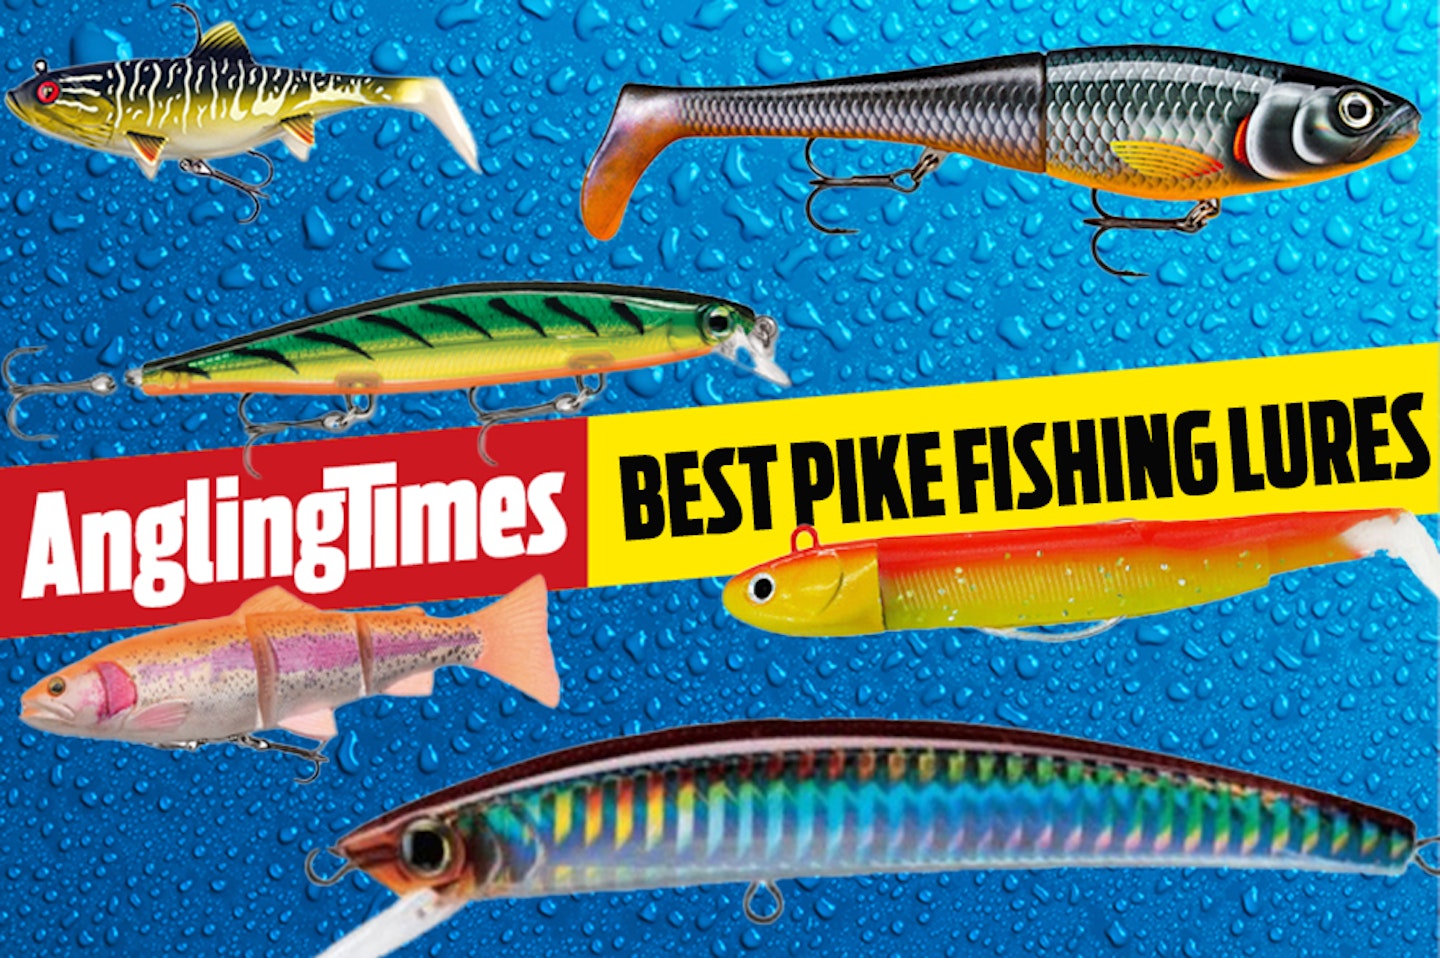 Realistic Fishing Lures for Pike and Trout